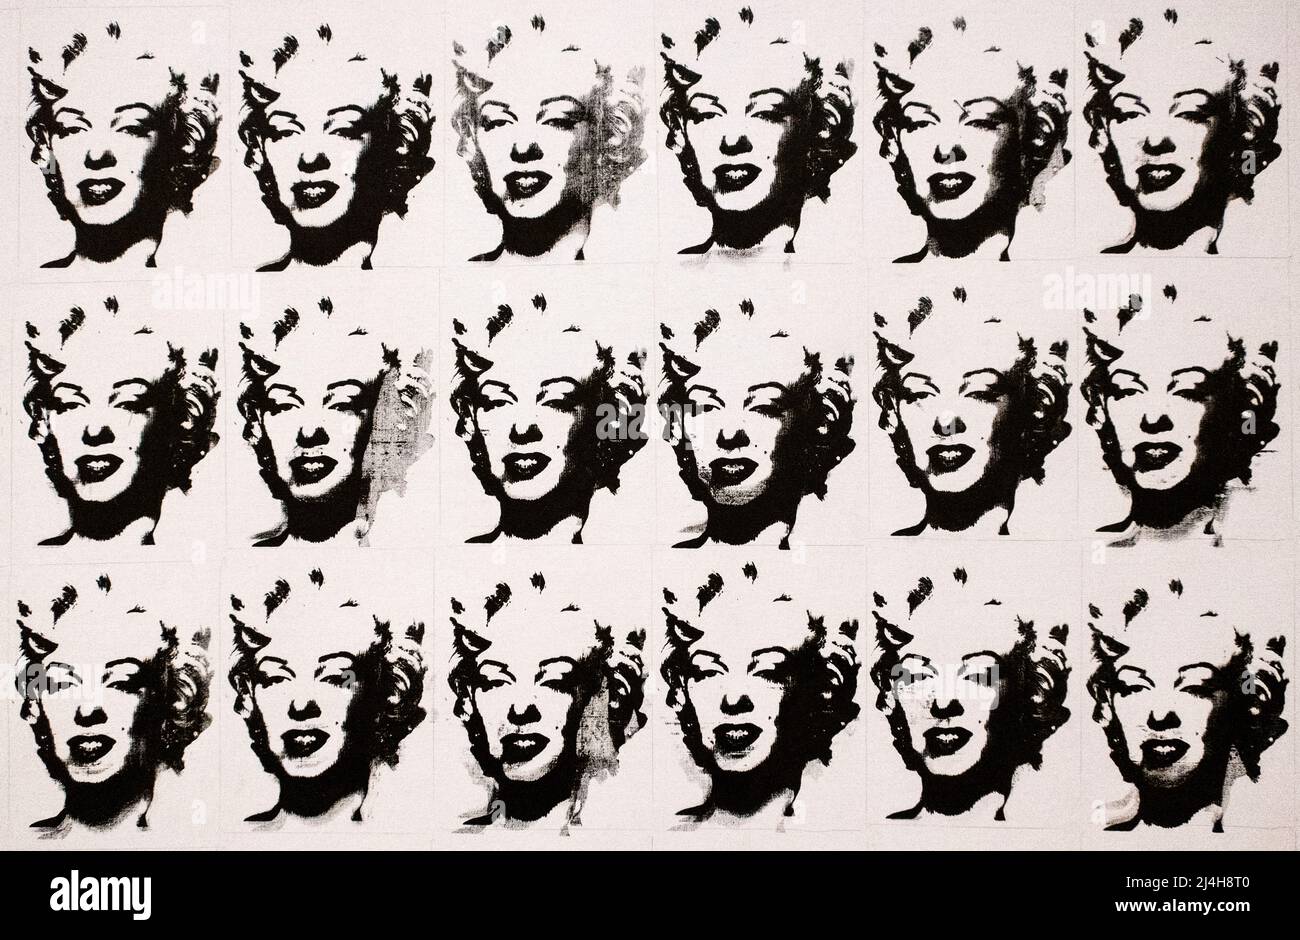 pop culture art of Andy Warshol's painting Marilyn x 100 at the Cleveland Museum of Art Stock Photo